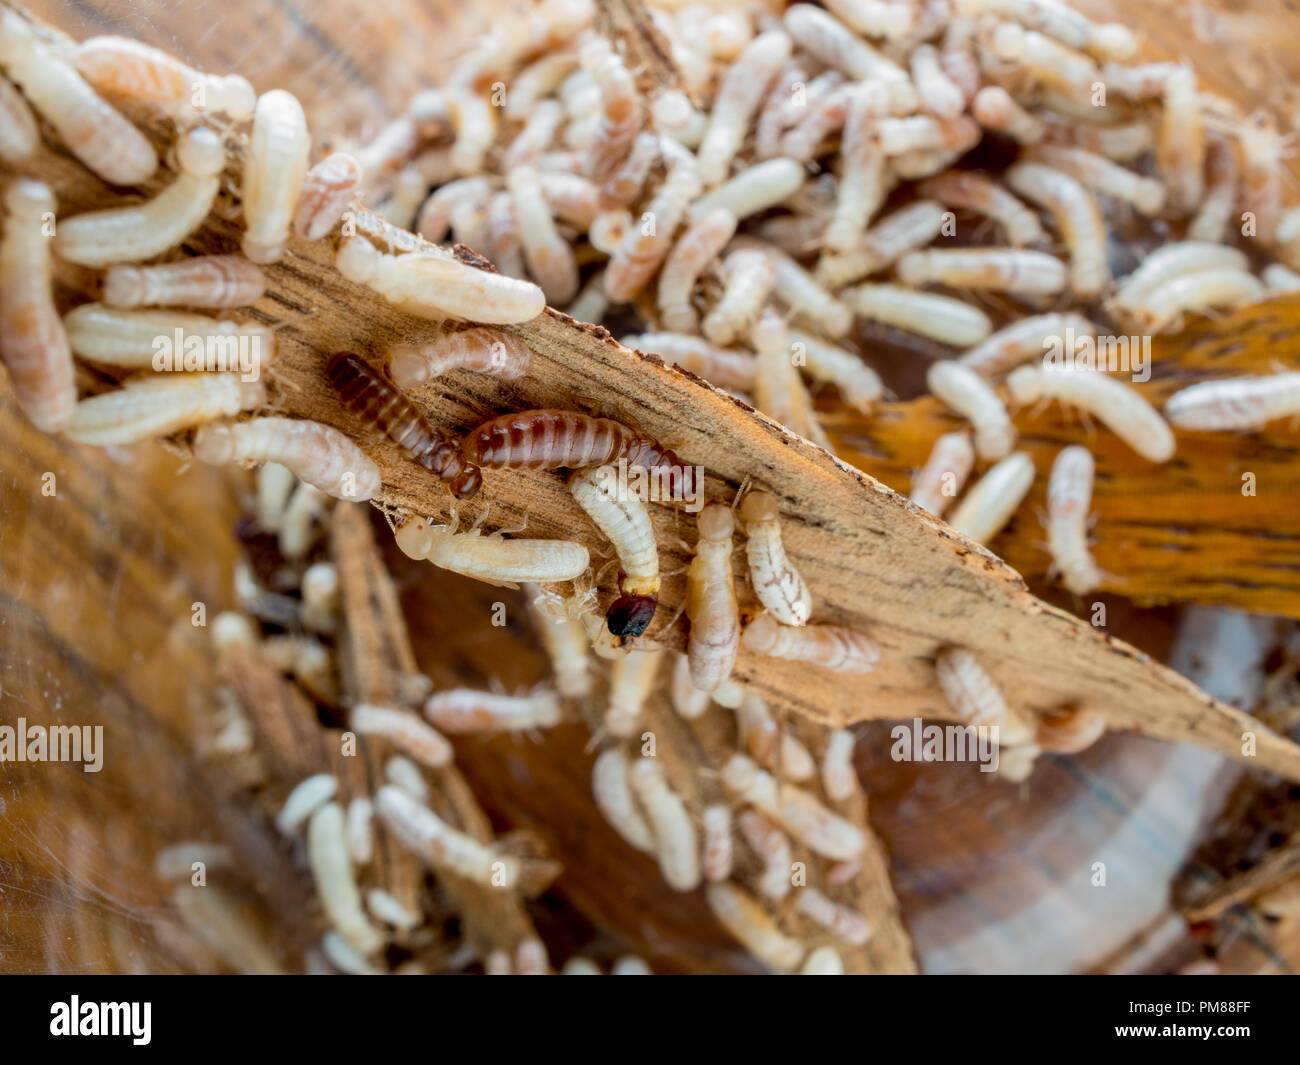 Drywood termites with queen and king (Cryptotermes) Stock Photo